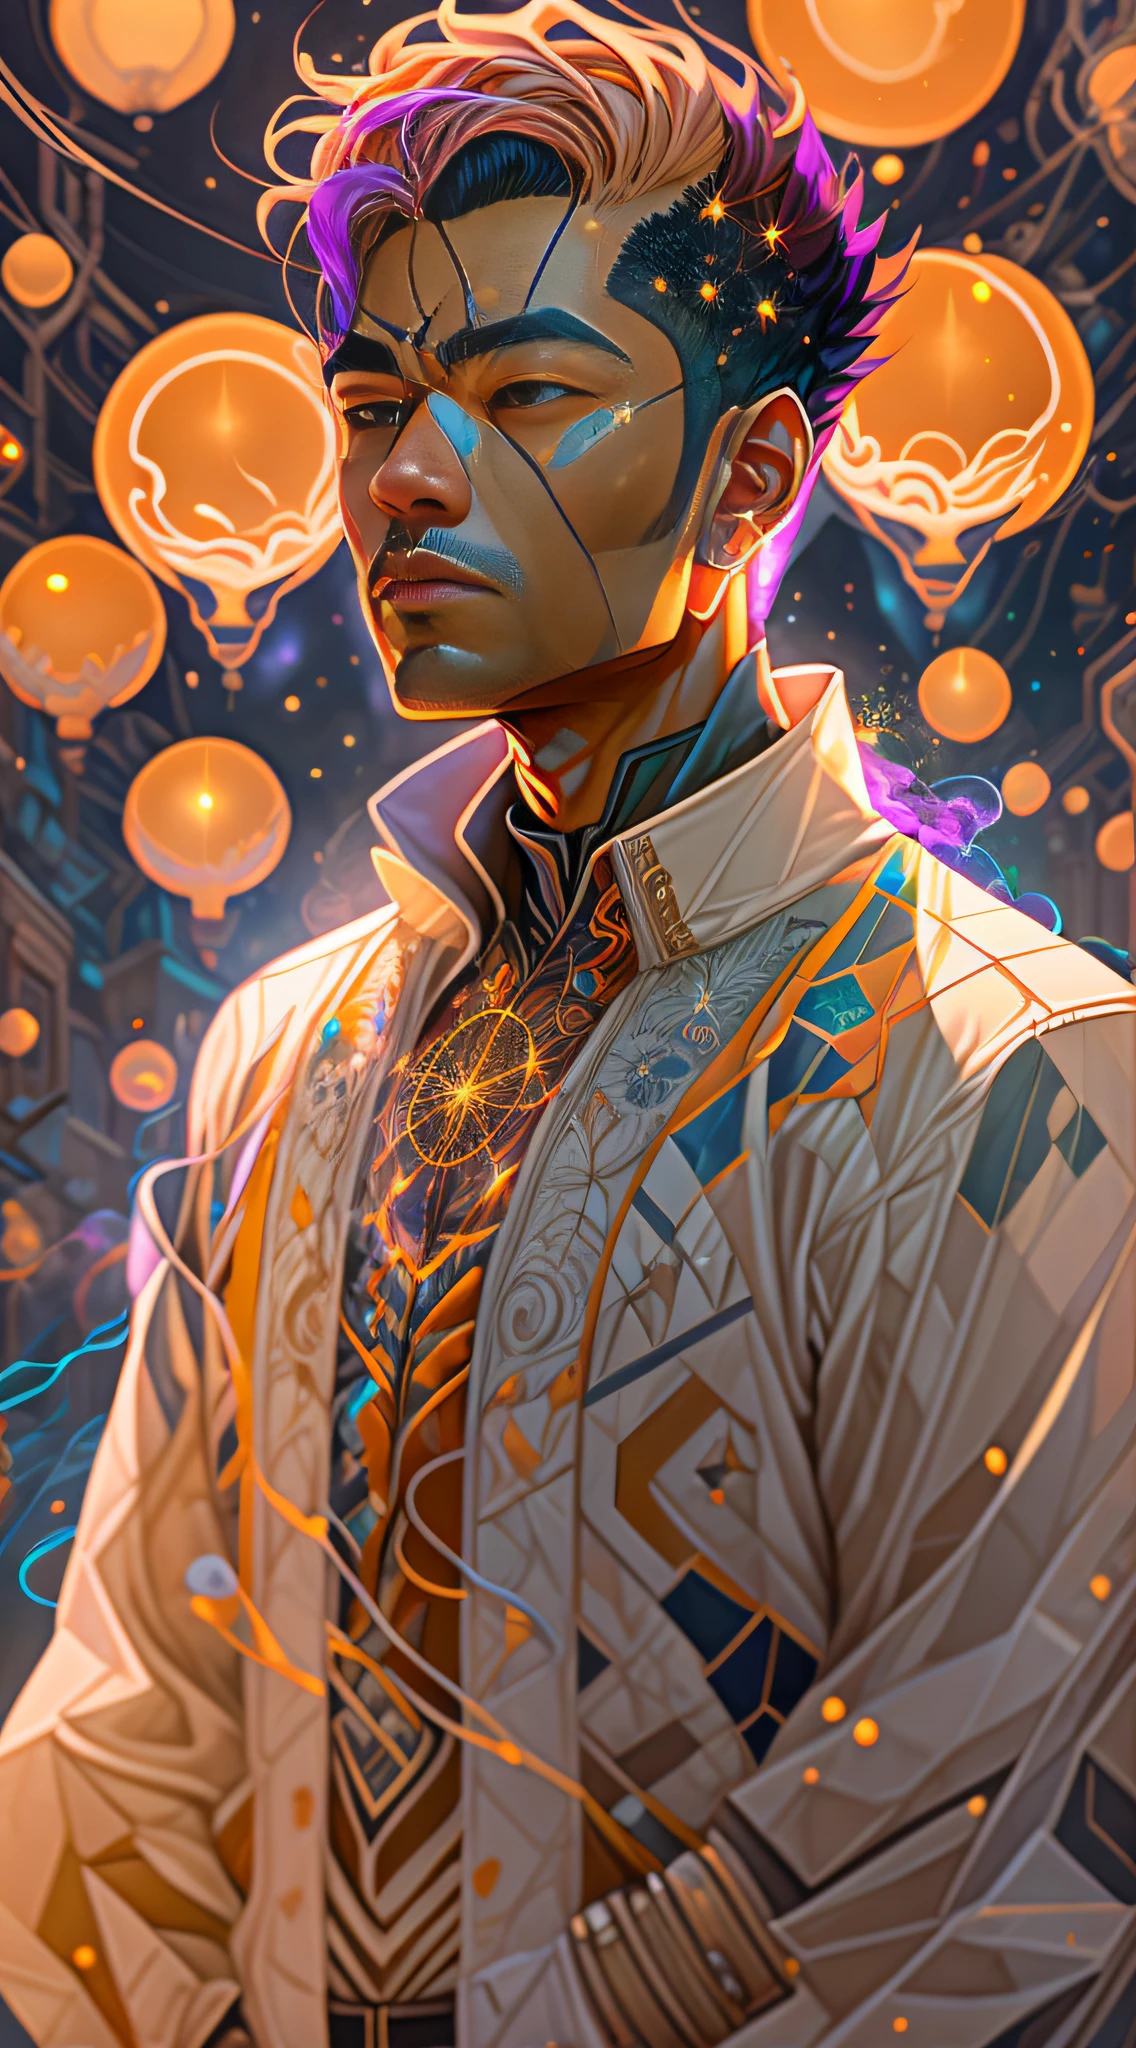 Craft an exquisite, high-resolution 4K masterpiece Draw a young caramel skin Male with bald Hair, standing on a Mysterious path floating in the middle of an alternate Dimension Leading to a Portal , turn his back on viewers , from behind , surrounded by Colorful energy Orbs glowing with fiery auras BREAK Dramatic lighting from distant SHooting stars Glistening like Diamonds illuminates the scene, casting deep shadows on the Clothing wearing streetwear Gucci Mink Designer Outfit, looking at the Portal and mysterious Contrasting colors on the other side with wonder and Awe with curiosity ,BREAK,Detailed,Realistic,4k highly detailed digital art,octane render, bioluminescent, BREAK 8K resolution concept art, realism,by Mappa studios,masterpiece,best quality,official art,illustration,ligne claire,(cool_color),perfect composition,absurdres, fantasy,focused,rule of thirds. The piece should be intricately detailed, inspired by the techniques of renowned artists such as Ryan Yee, Sachin Teng, JC Leyendecker, Jen Bartel, Beeple, and James Jean, with a particular emphasis on Sachin Teng's style. 

The artwork should reflect the aesthetic of Shin Hanga, a winner of the Behance contest, and should achieve perfect symmetry. The subject of the portrait is Bald Hair Caramel skin Male. The atmosphere should be ethereal, with smoke, white light, and strong light elements. 

Incorporate elements of surrealism into the piece, with ultra-detailed features and glowing eyes. The full-body shot should also include a close-up of the body, with Akuma holding weapons - a katana and a double dragon winding. 

The color palette should be dominated by a mesmerizing blue light, and a bracer should be part of the attire. The piece should be available in HD, Ultra HD, and 4K resolutions. Finally, to add a dramatic effect, include a thunderous backdrop to the scene, creating a surreal and captivating masterpiece.